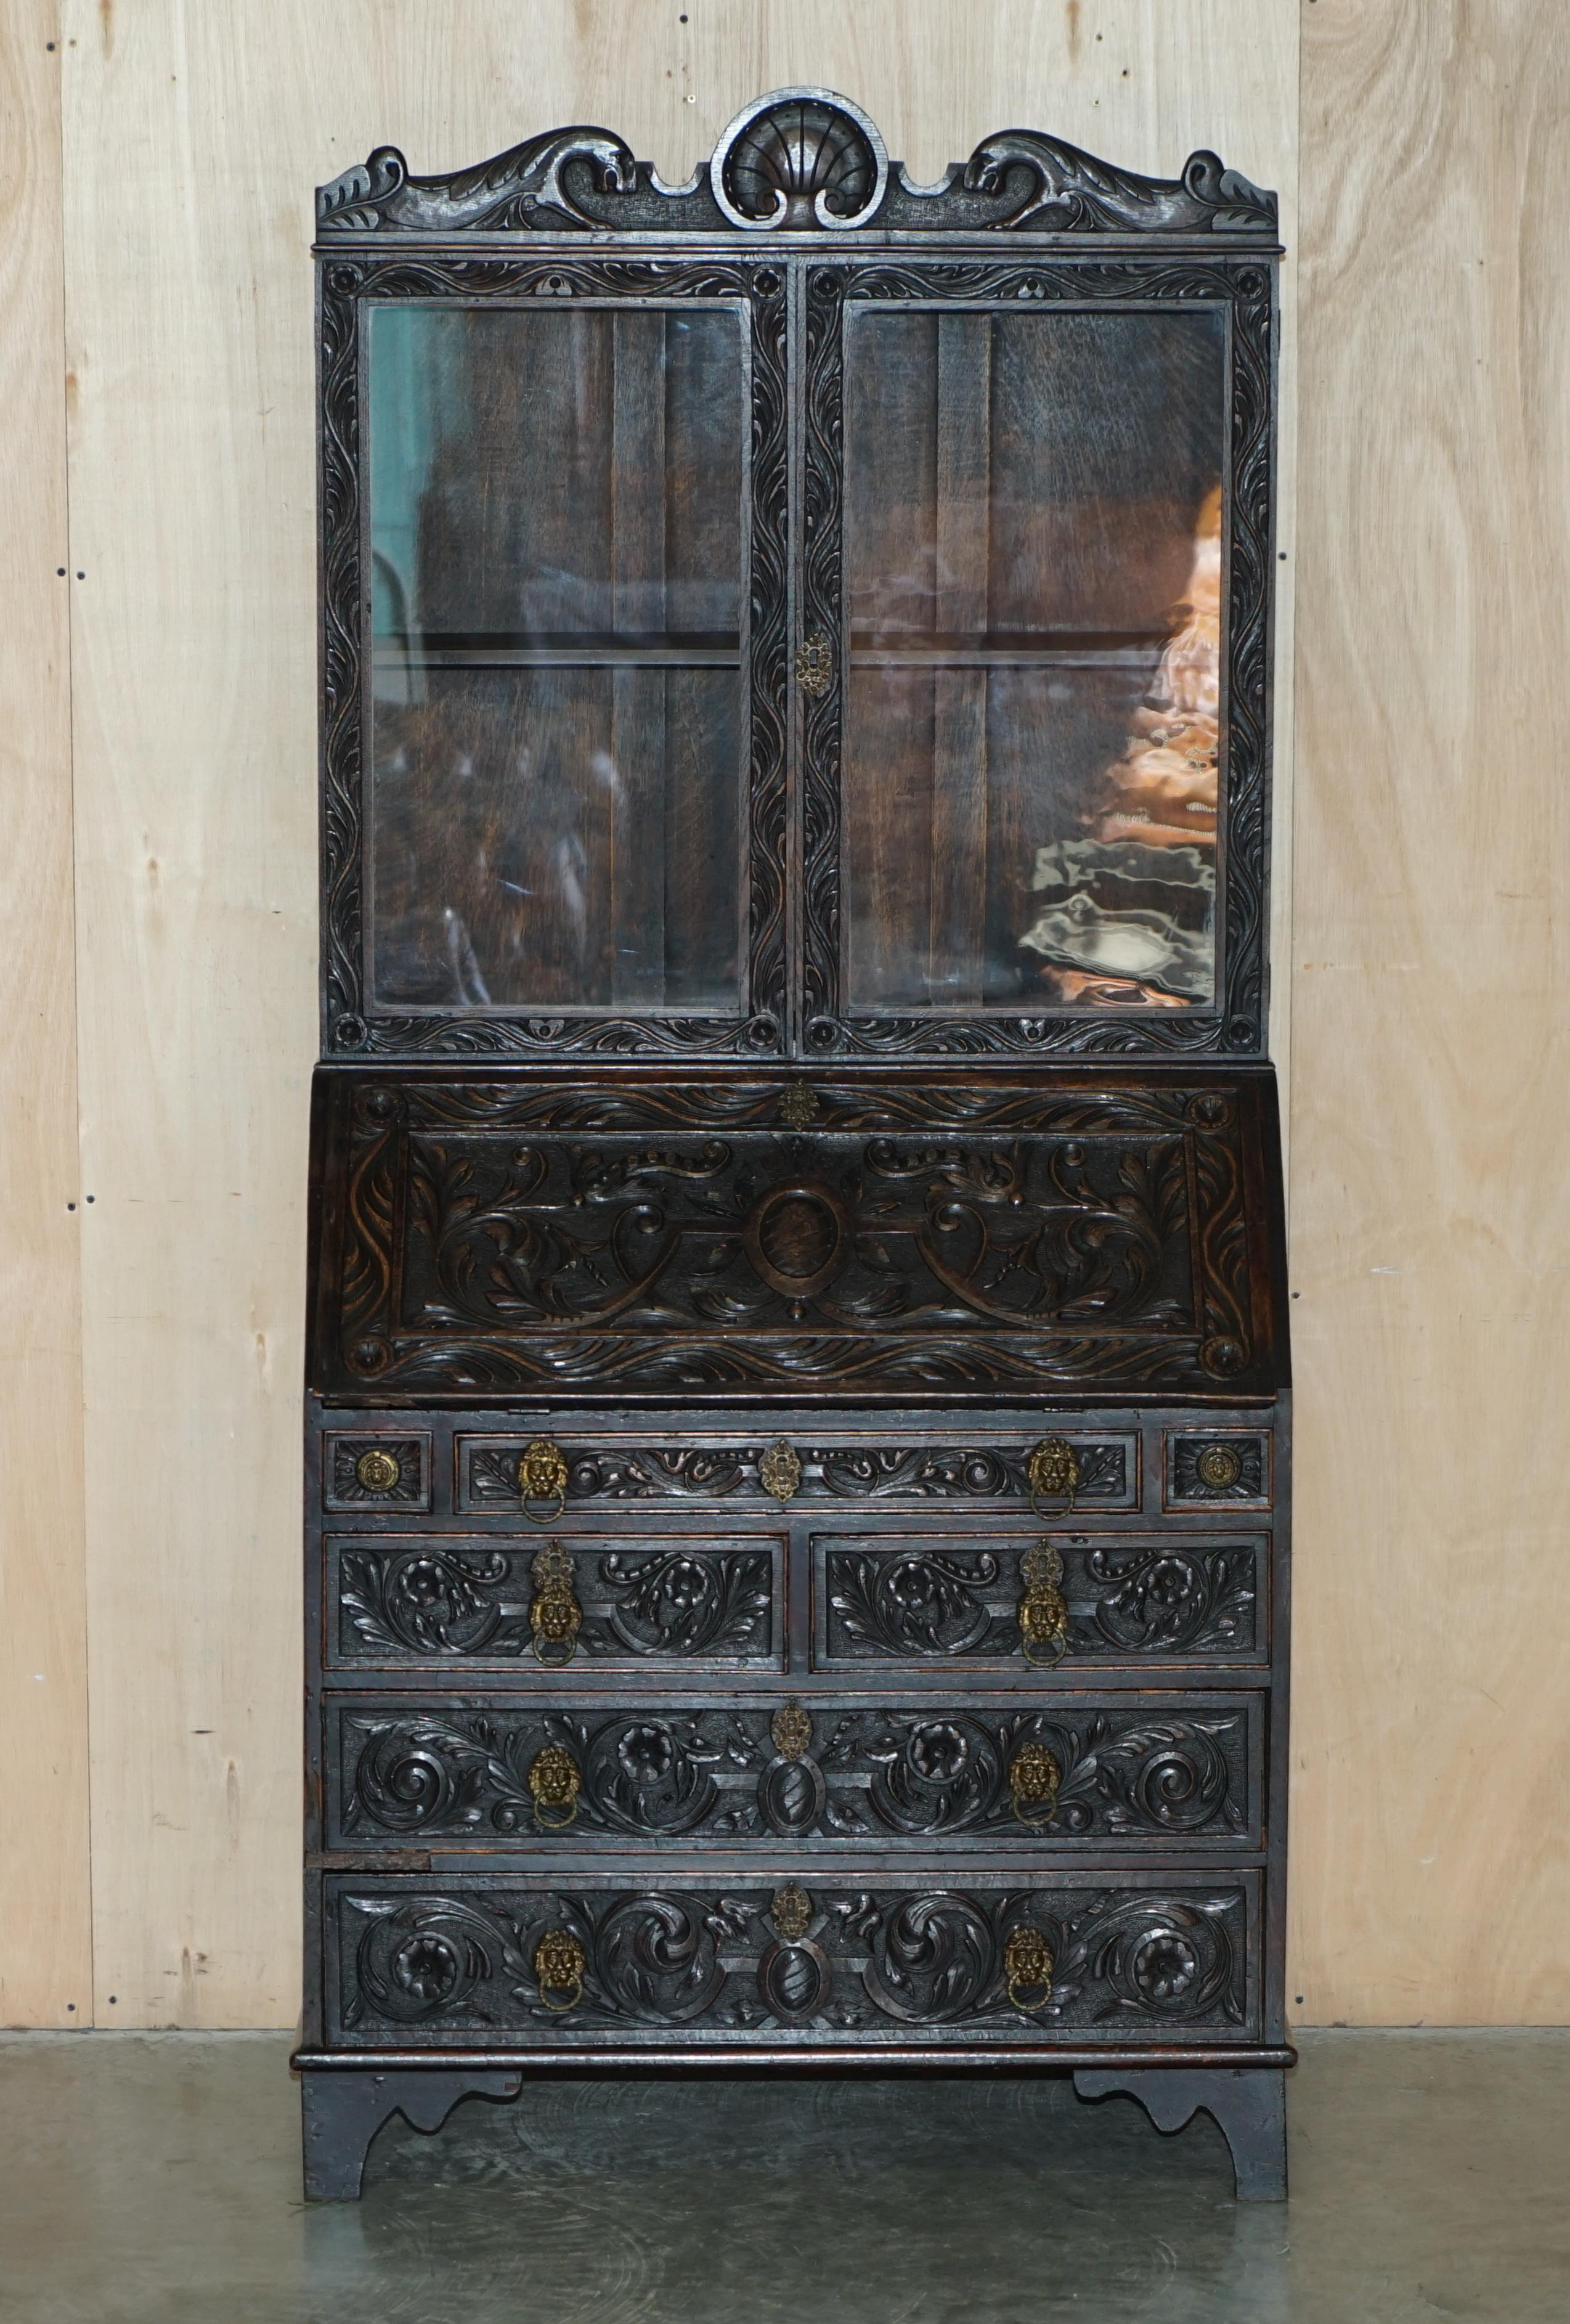 We are delighted to offer for sale this very rare and highly collectable, ornately carved, circa 1860 Jacobean revival, Antique Library Bureau bookcase

Please note the delivery fee listed is just a guide, it covers within the M25 only for the UK